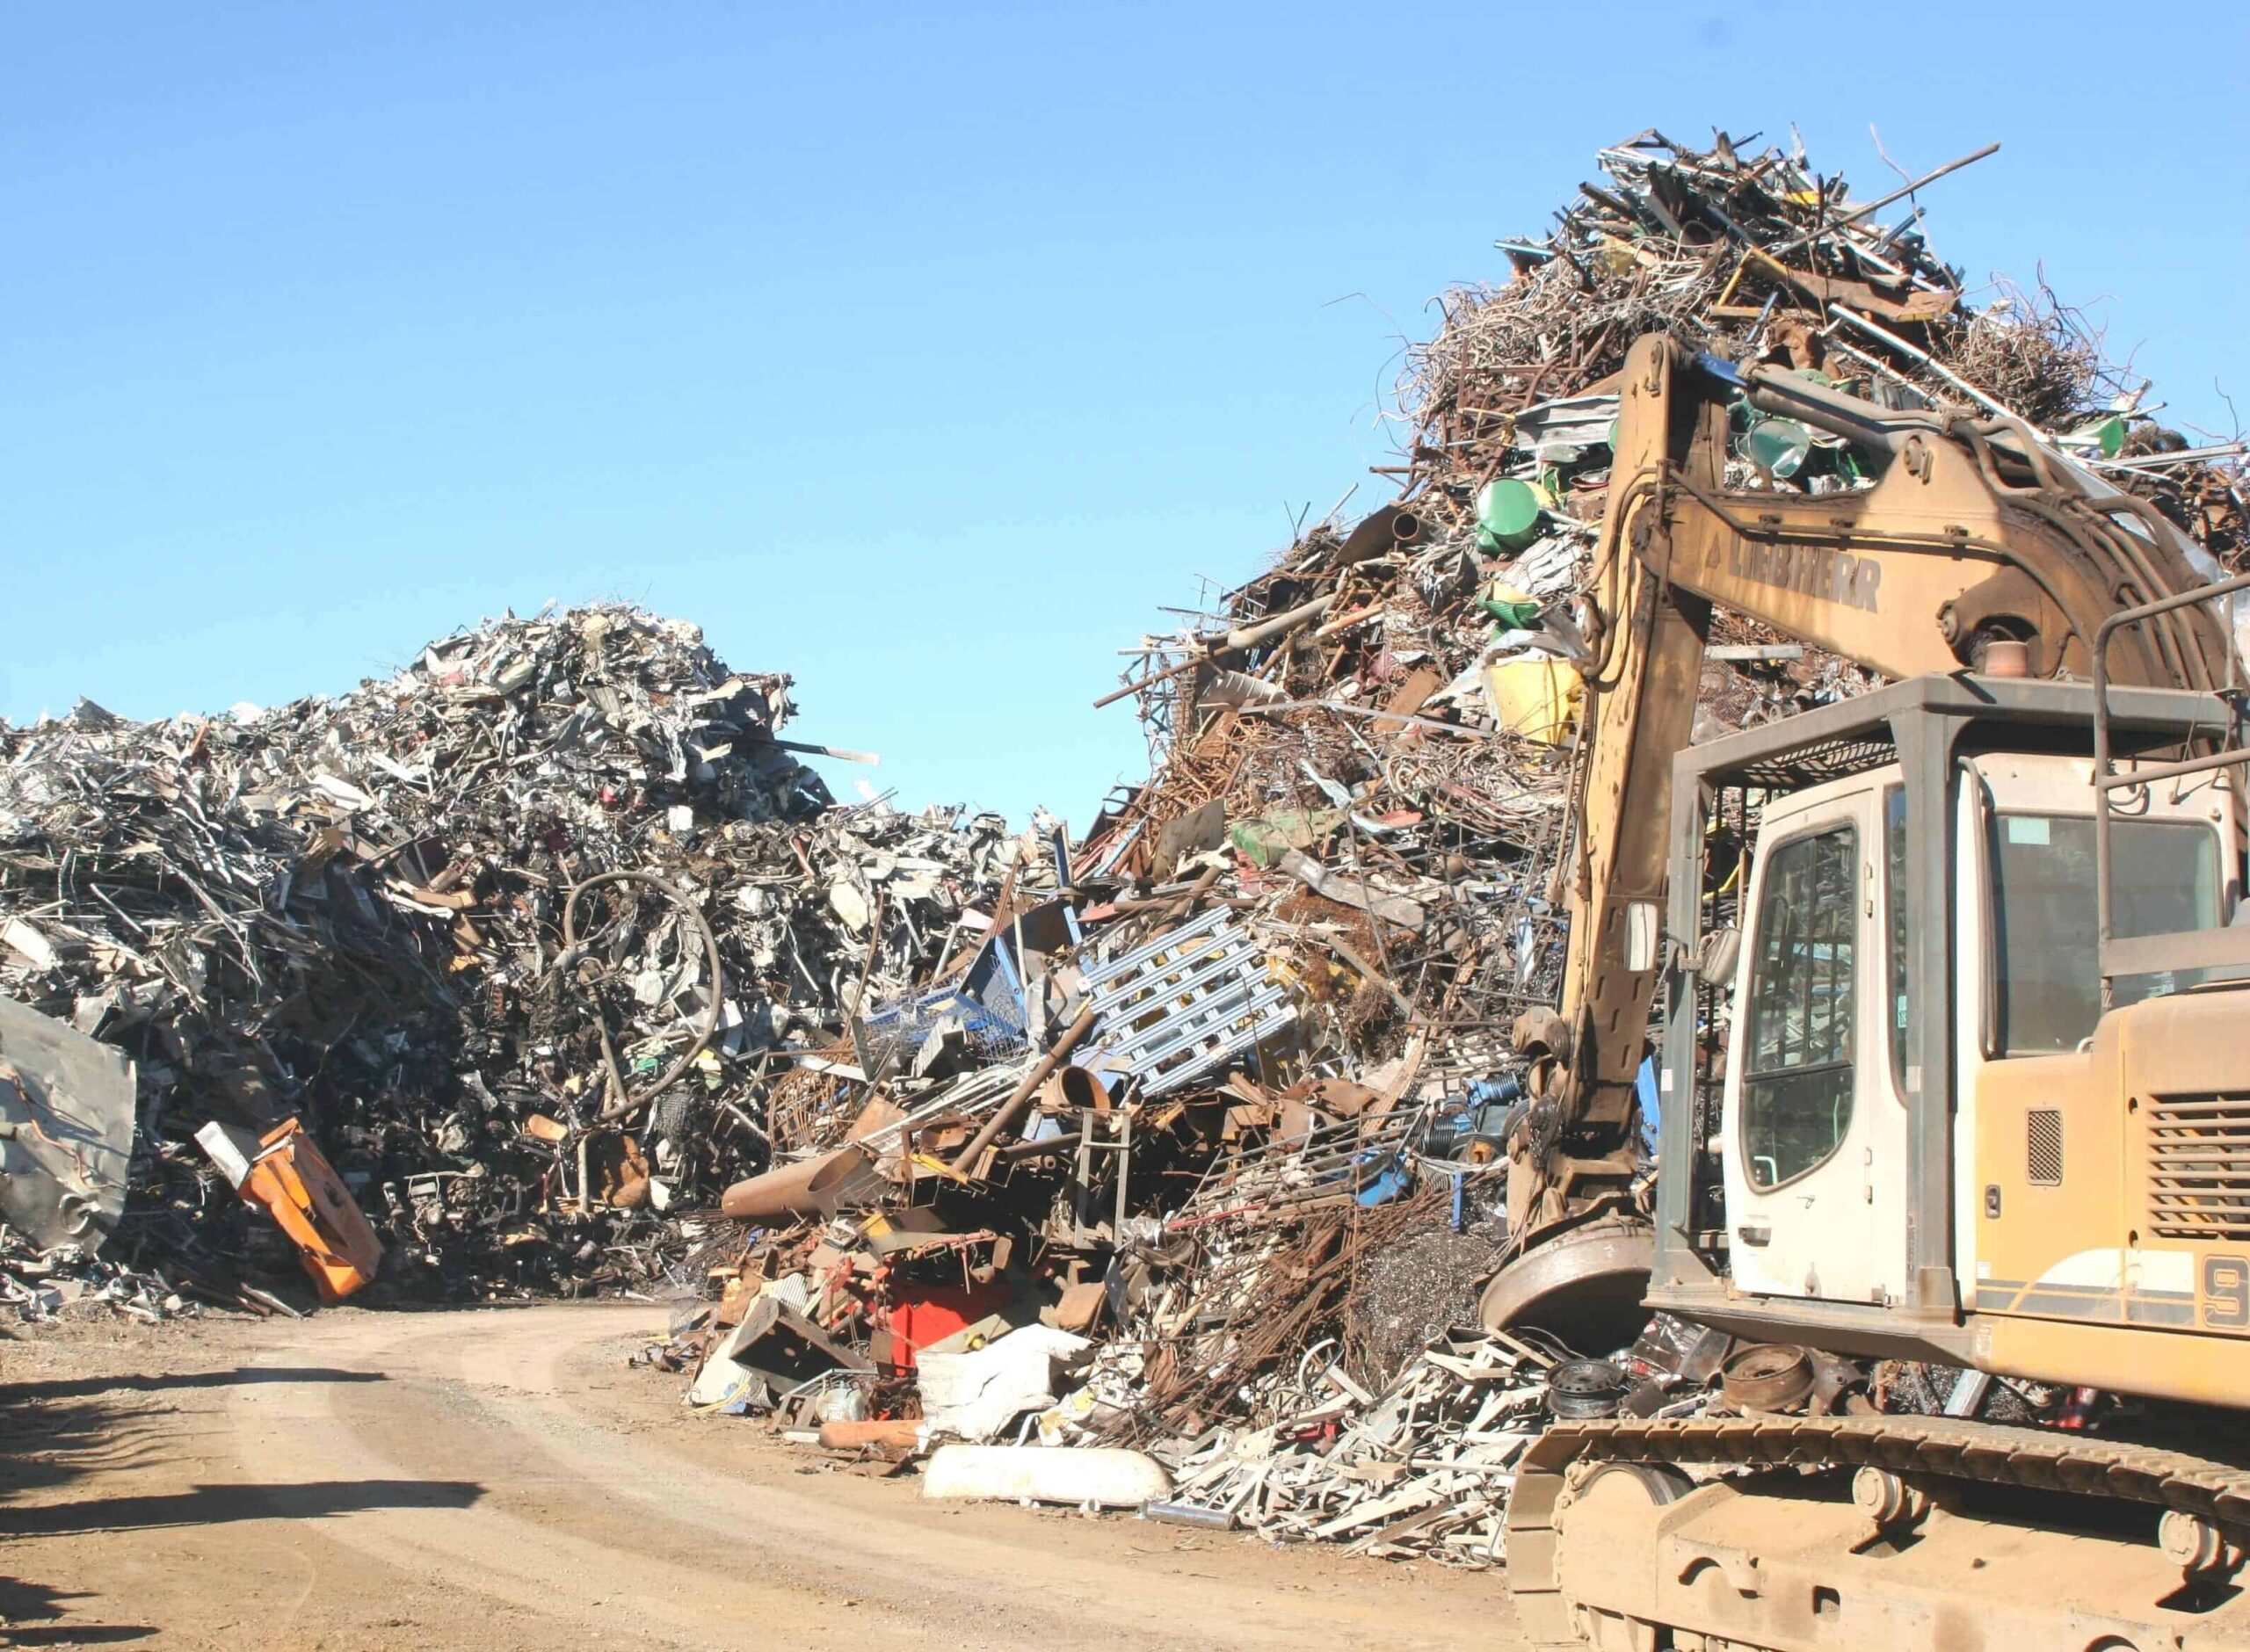 Scrap Metal Recycling Near Me | Action Metal Recyclers